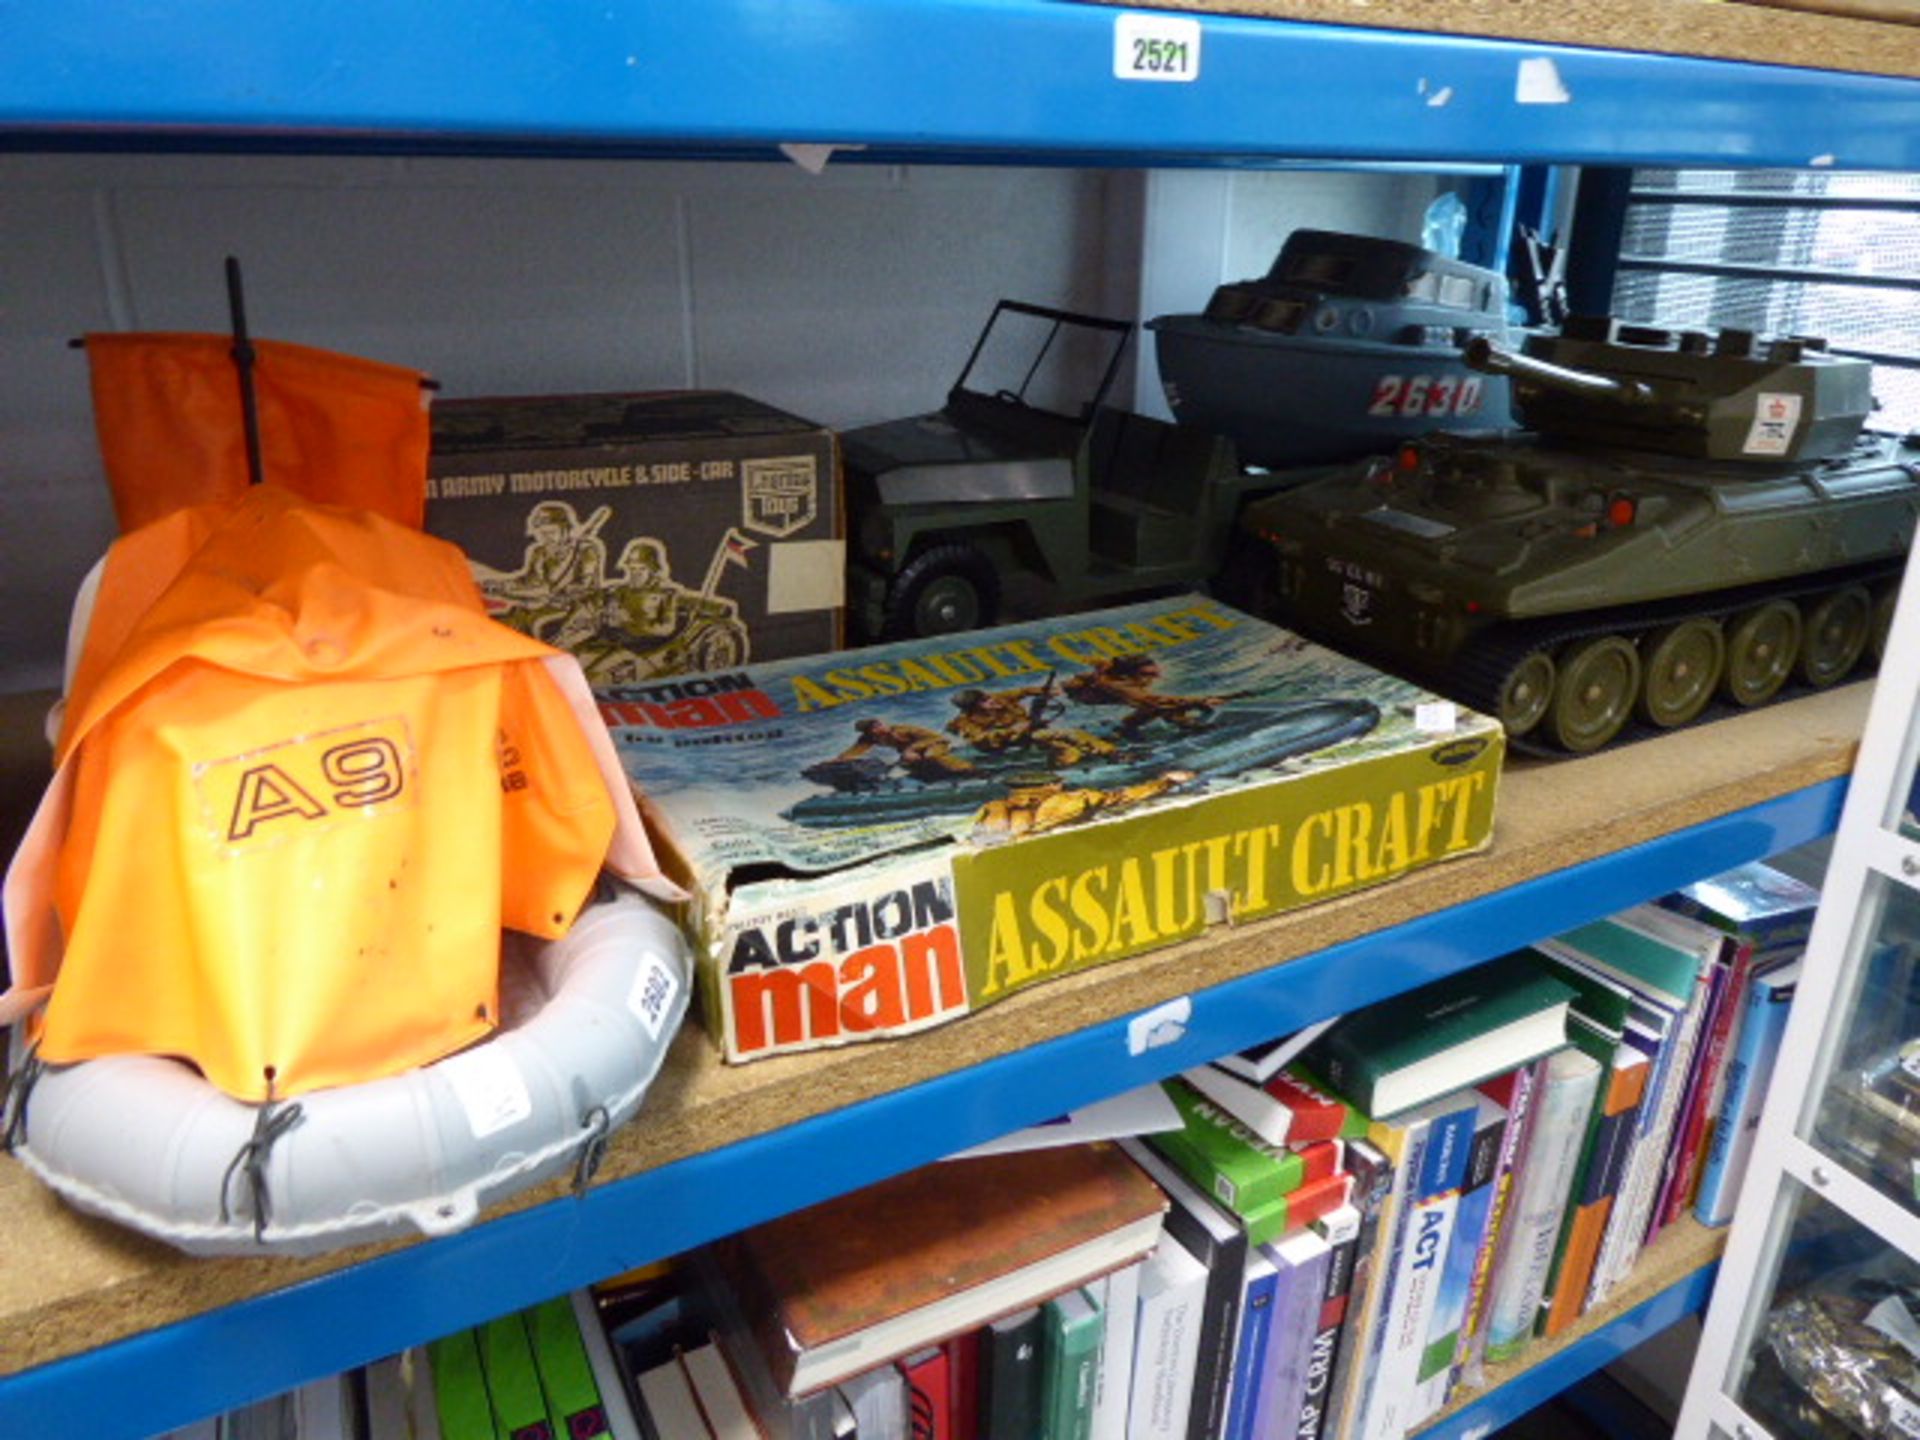 Selection of various Action Man vehicles including tank, boat, jeep, assault craft, etc